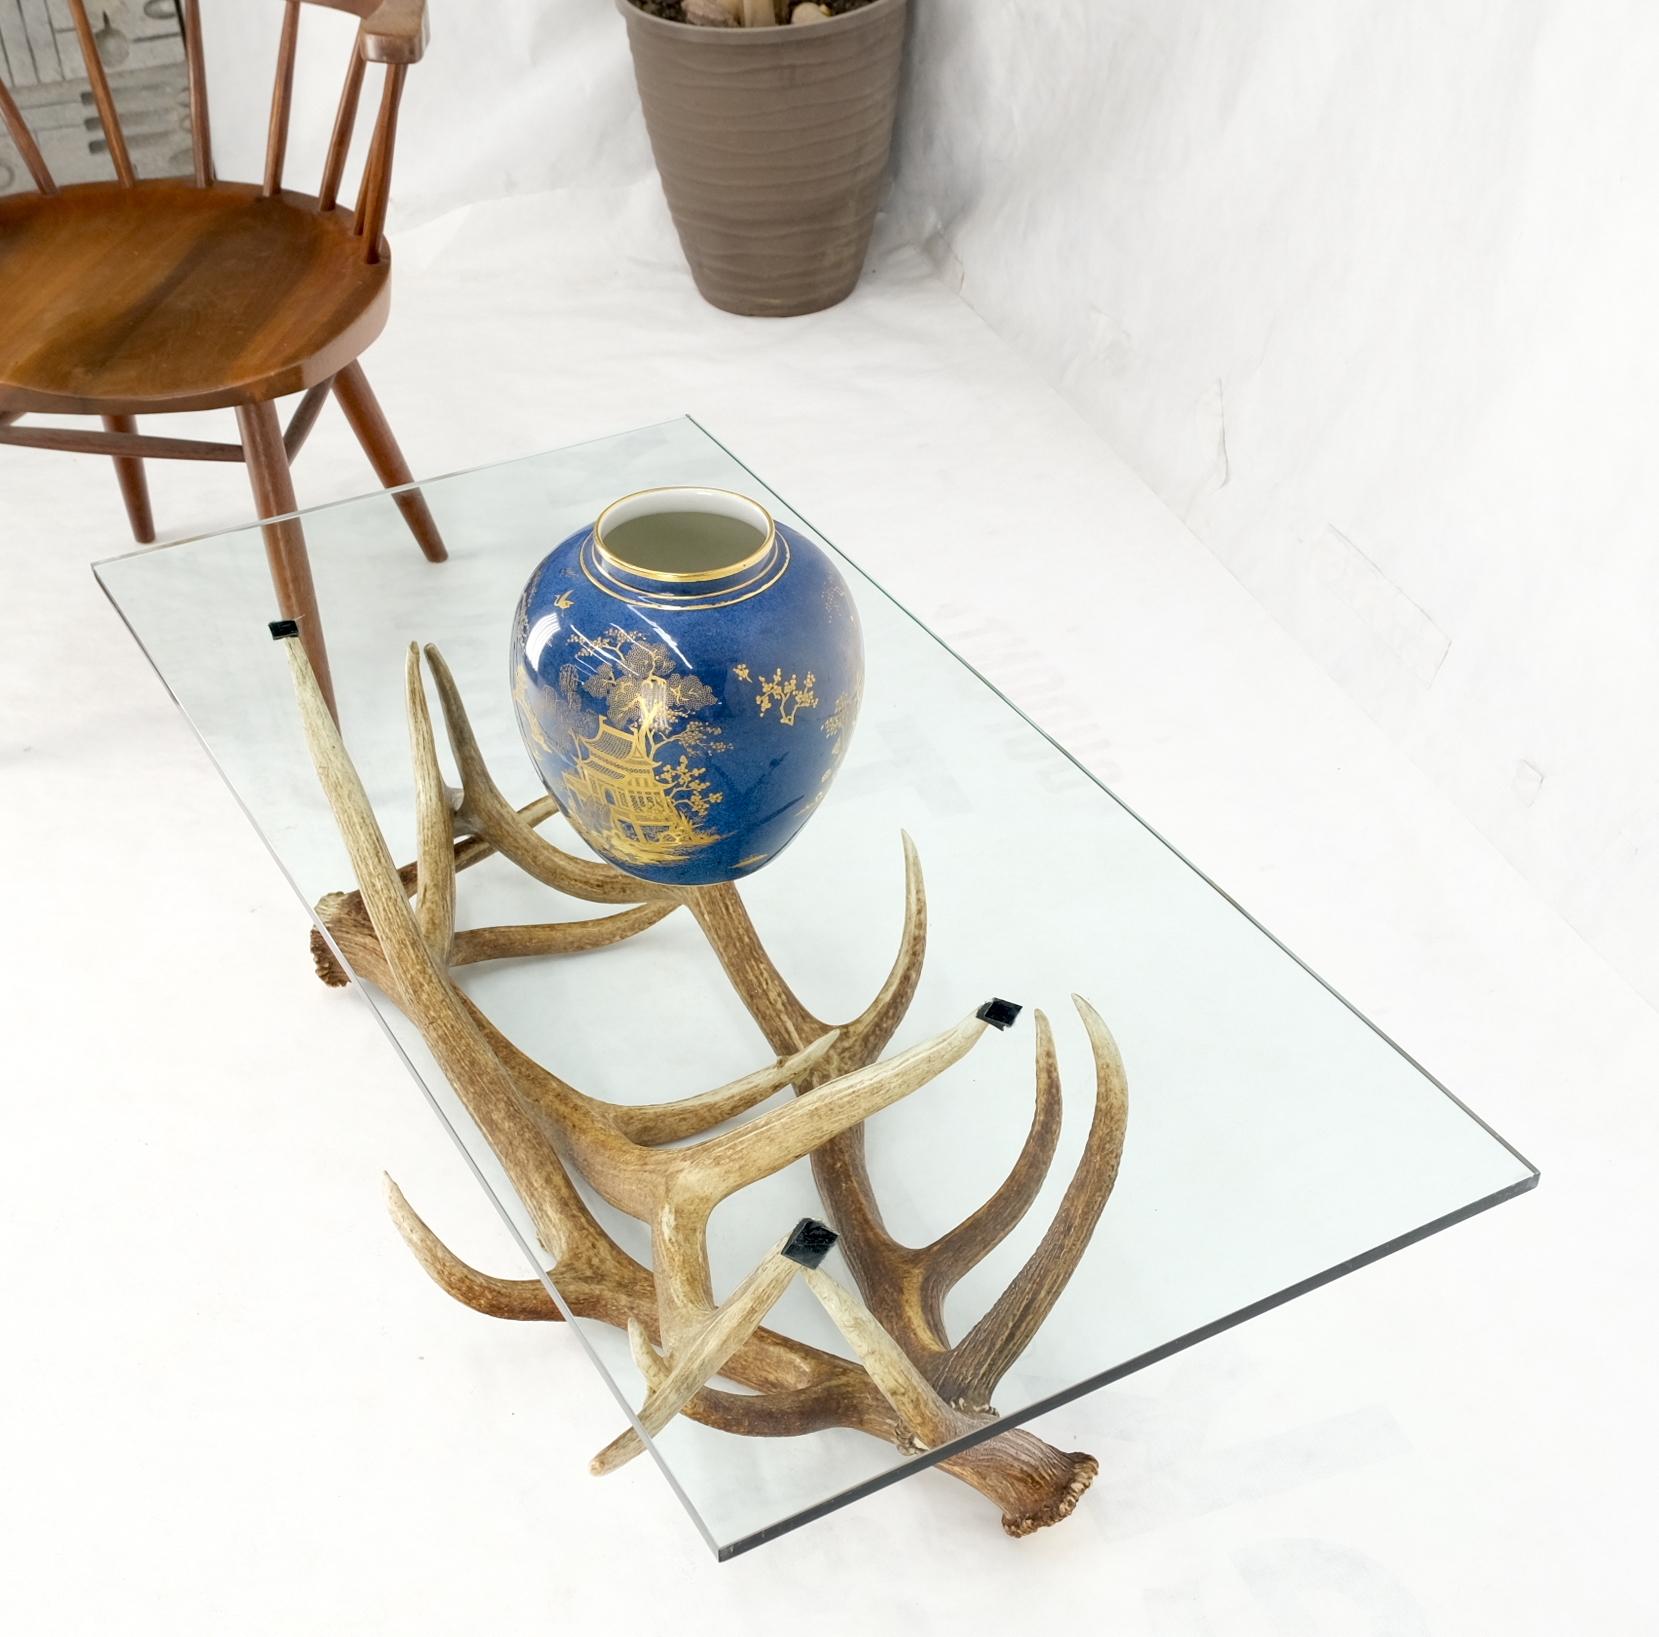 Antler Grouping base glass rectangle top coffee table Folk Art Mid-Century Modern.
Artist signed. Glass top measures 1/2'' thick.